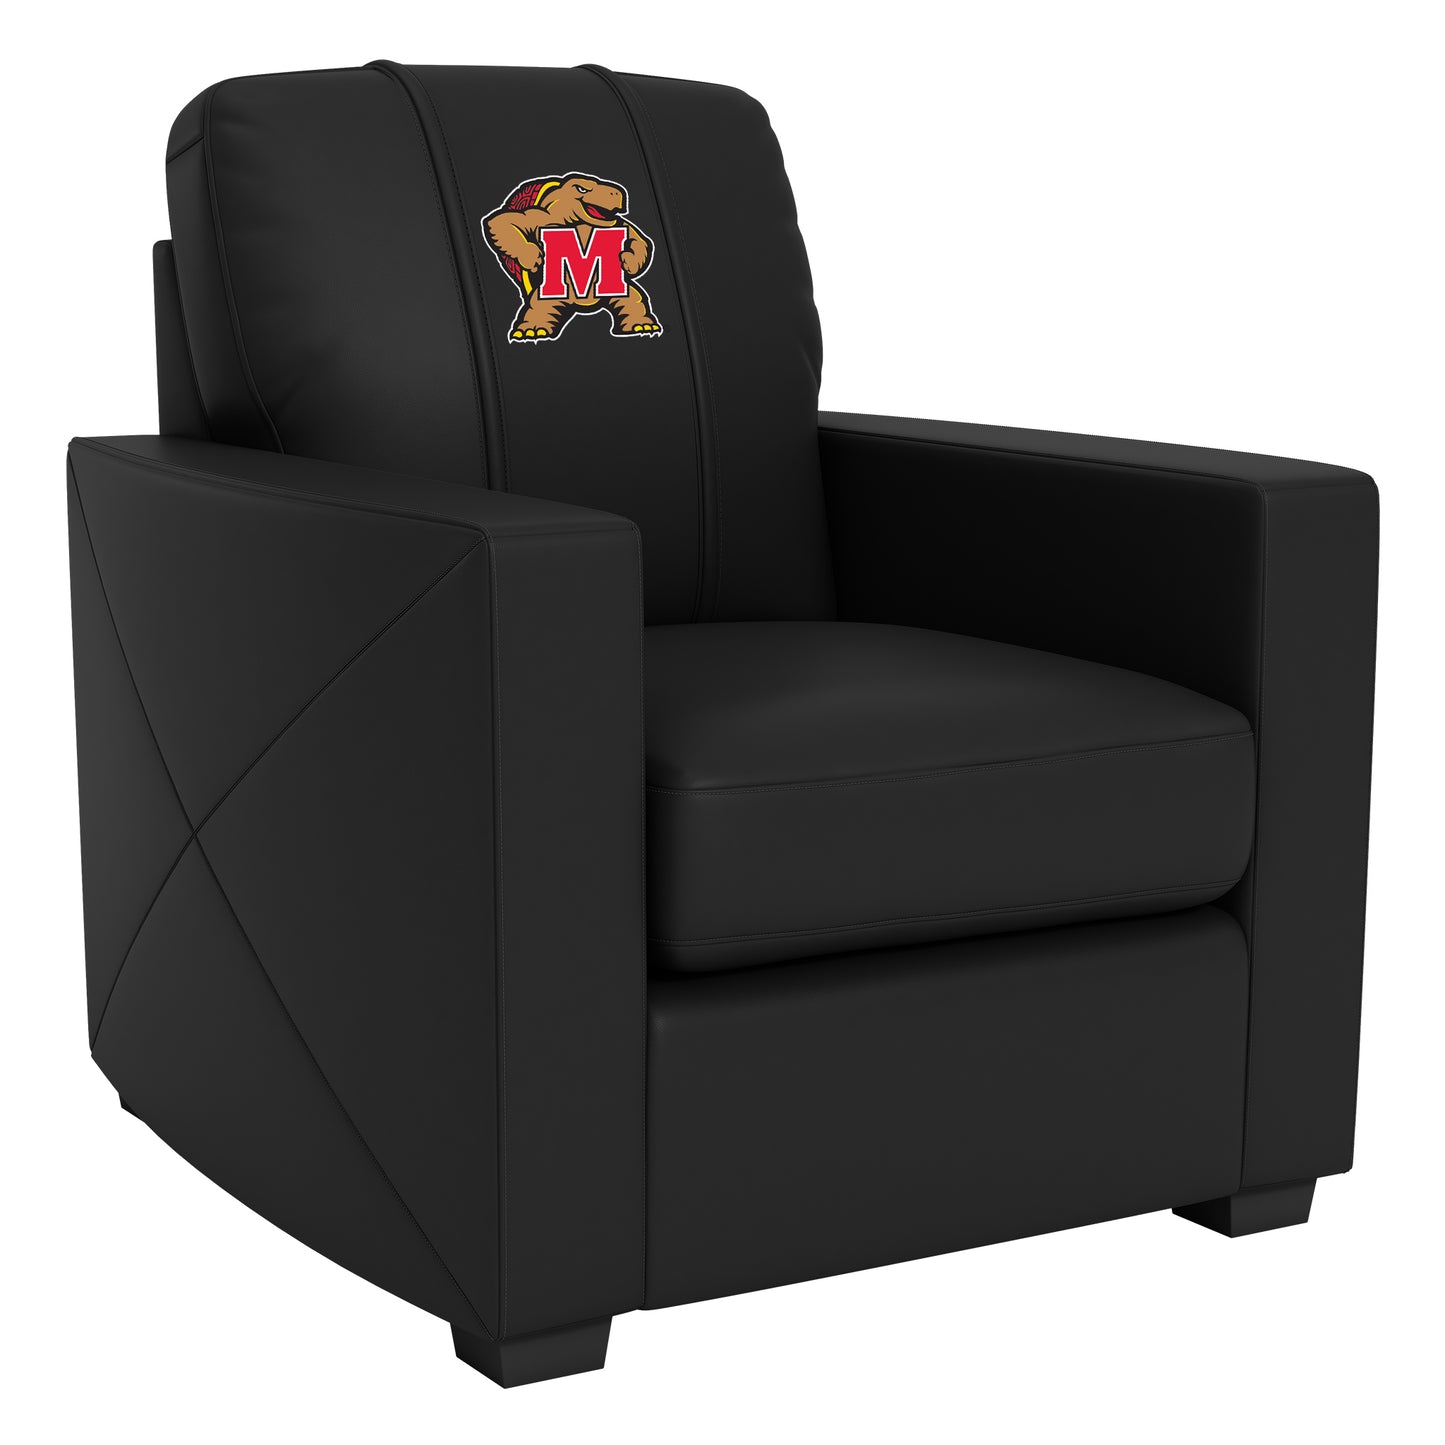 Silver Club Chair with Maryland Terrapins Logo